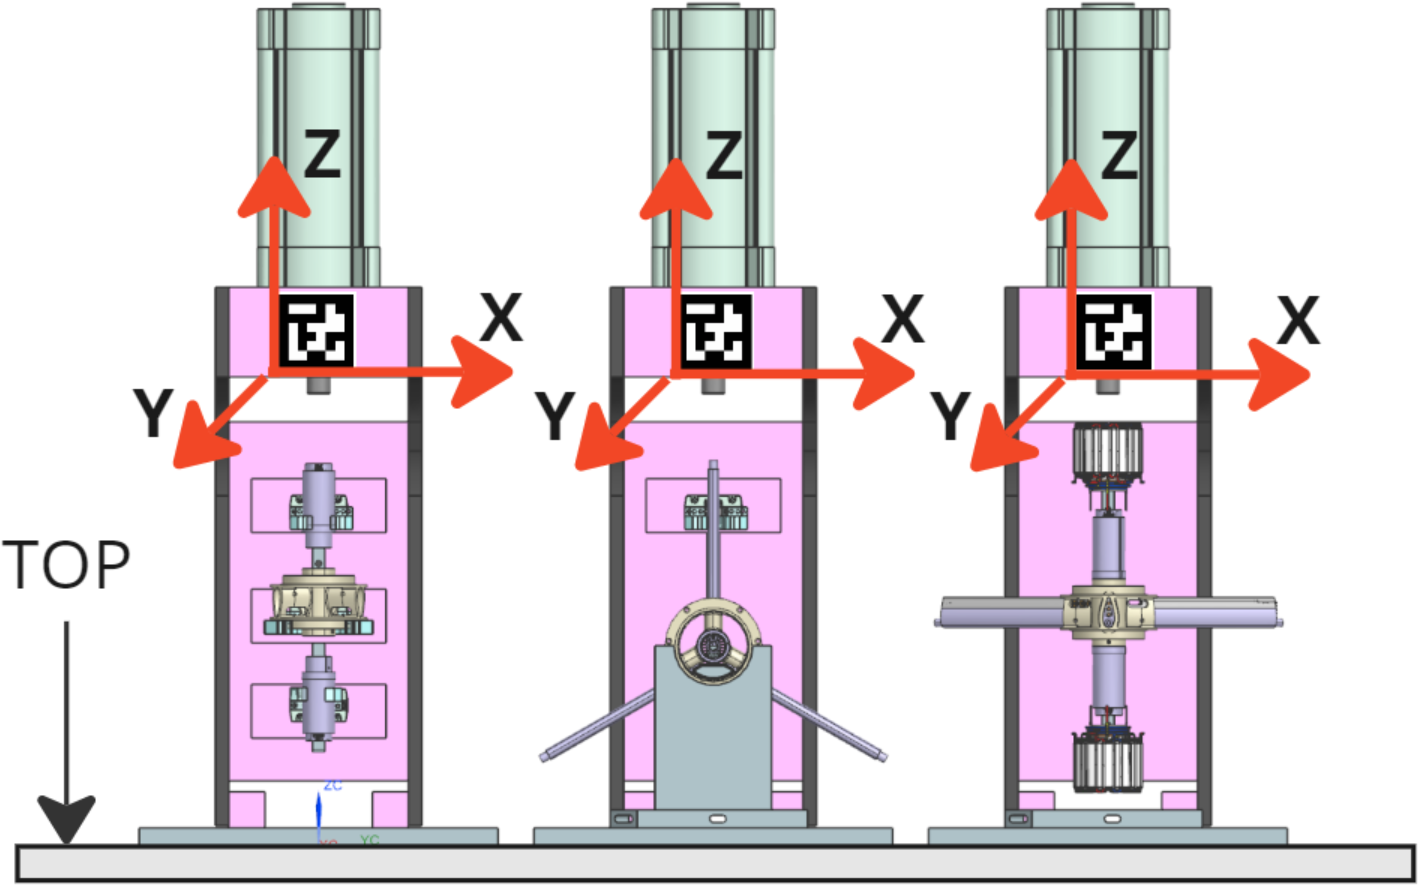 The image shows the localisation tags mounted on the vertical faces of the process module tooling. This configuration allows the robot to check the location of the equipment interacting with every cycle with a minimum cycle time penalty.